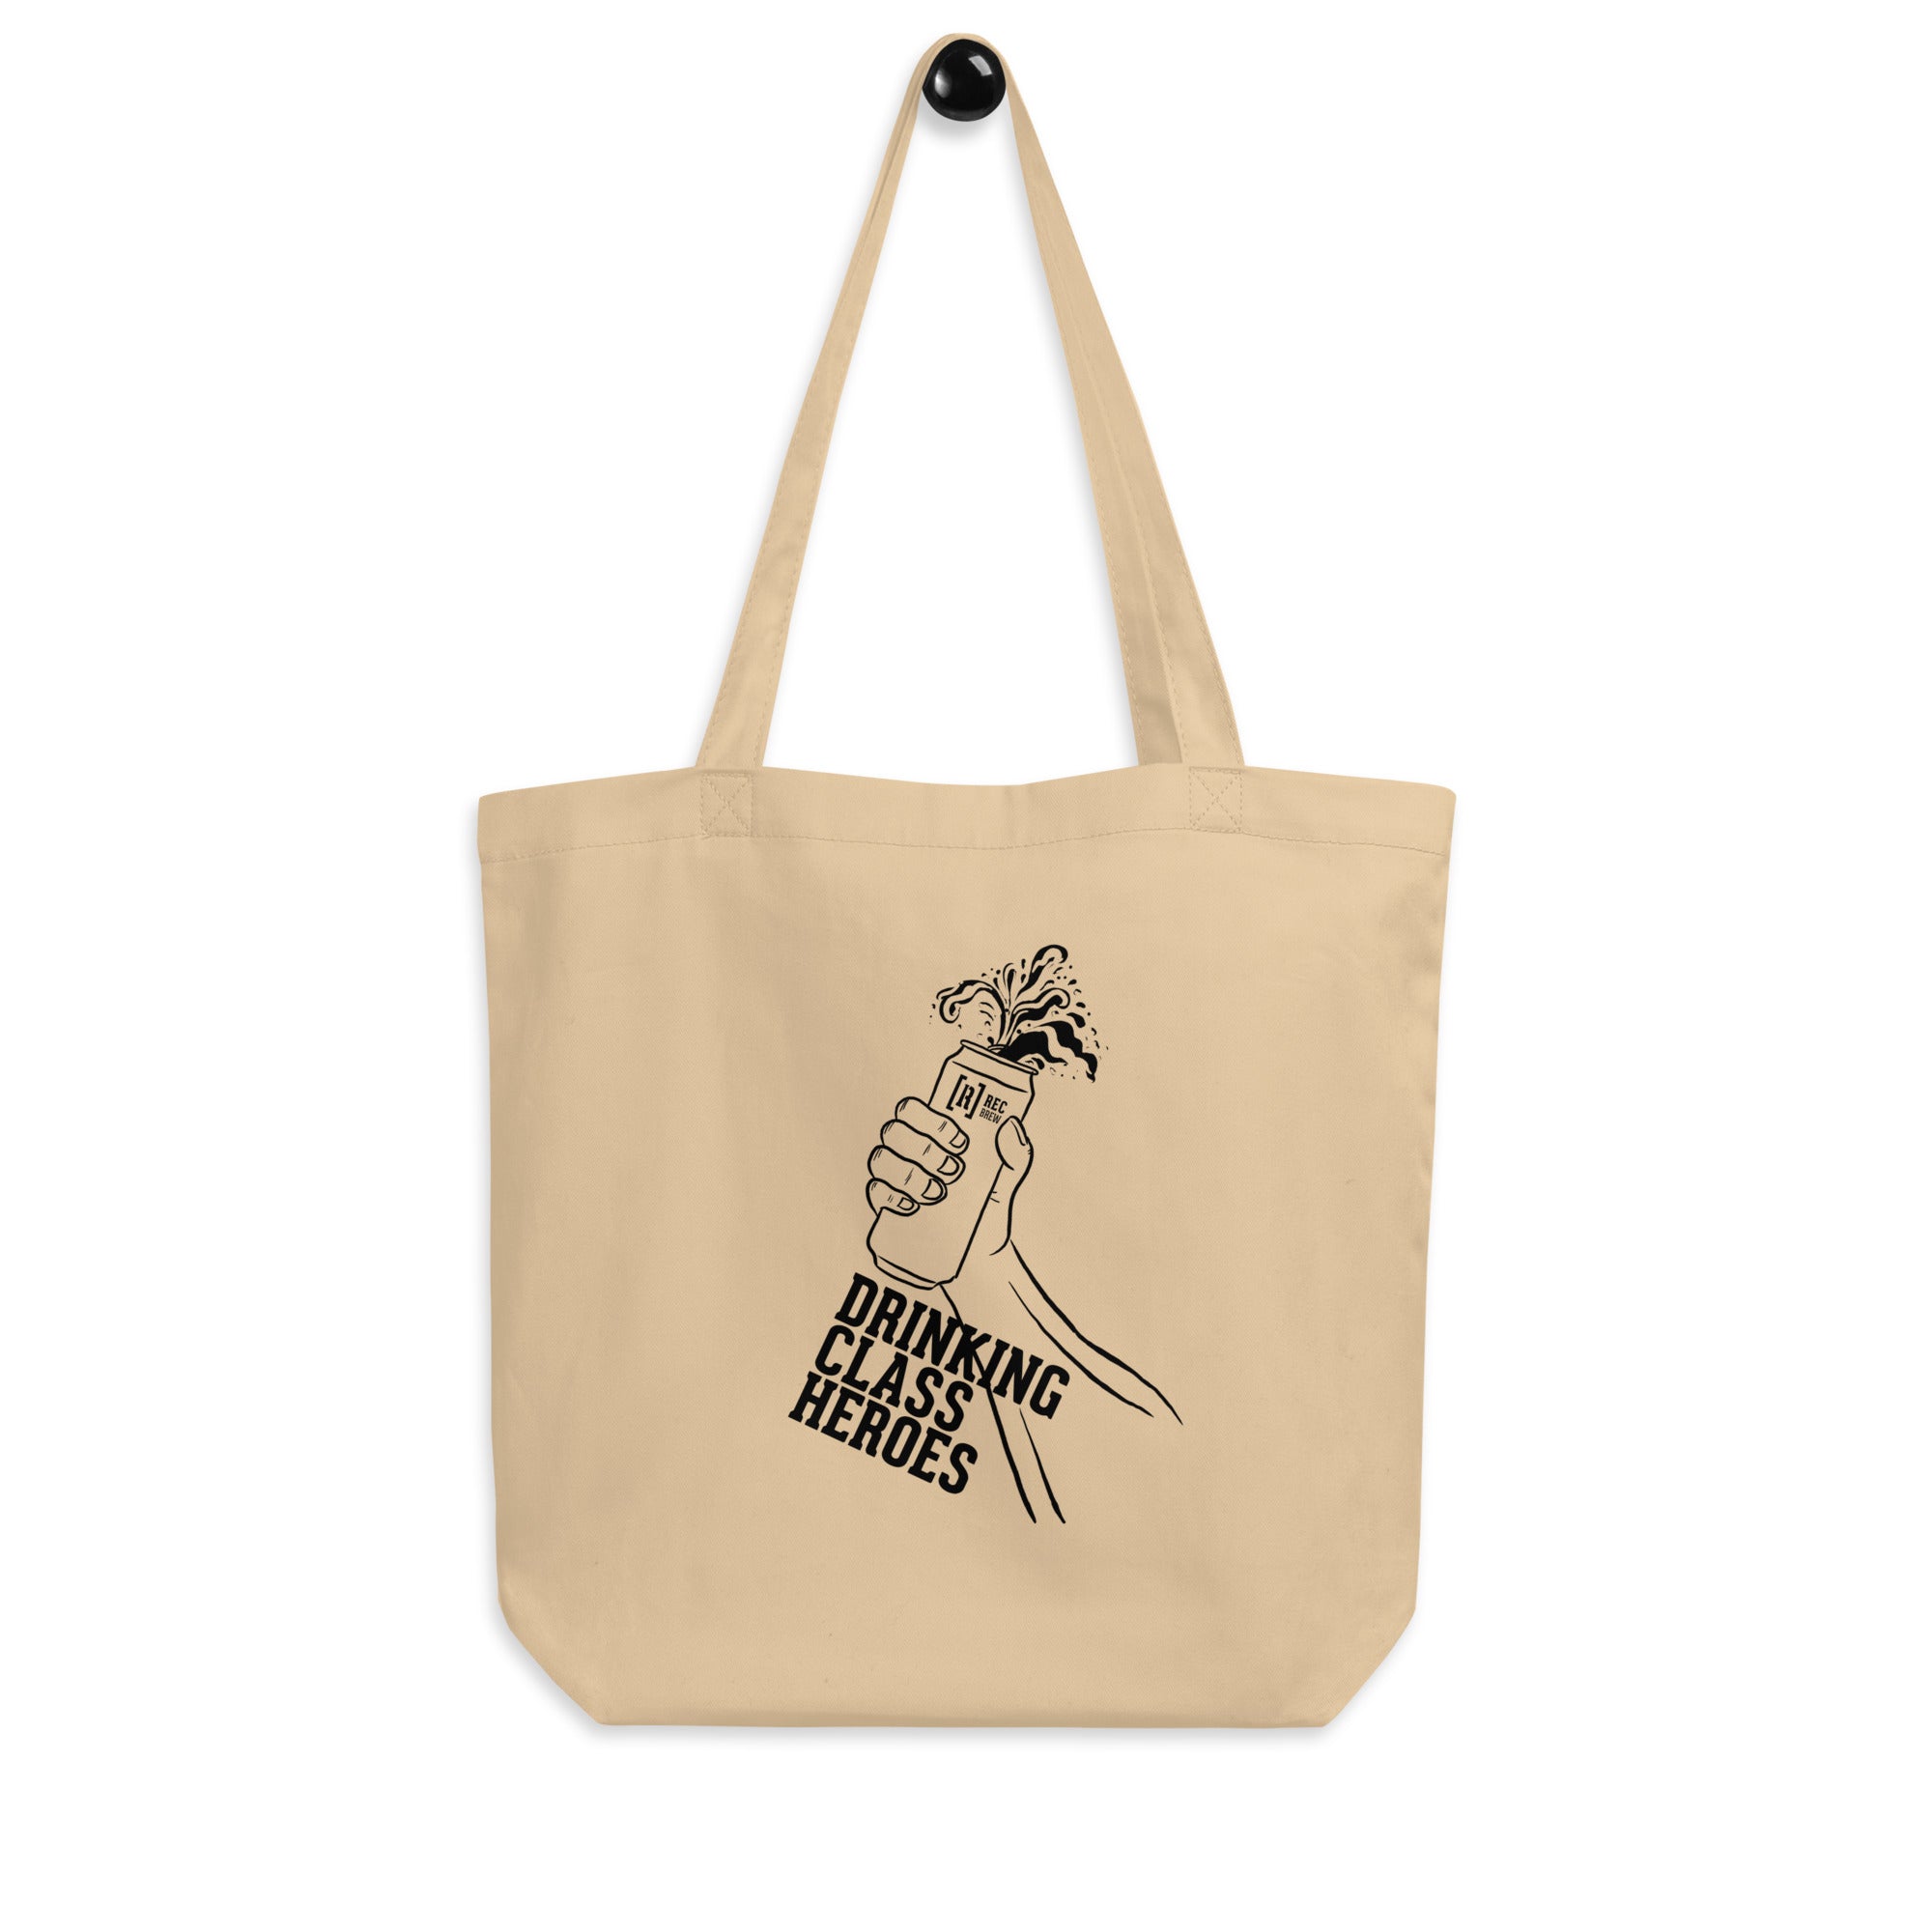 Tote bag Drinking Class Heroes - Beis - Rec Brew